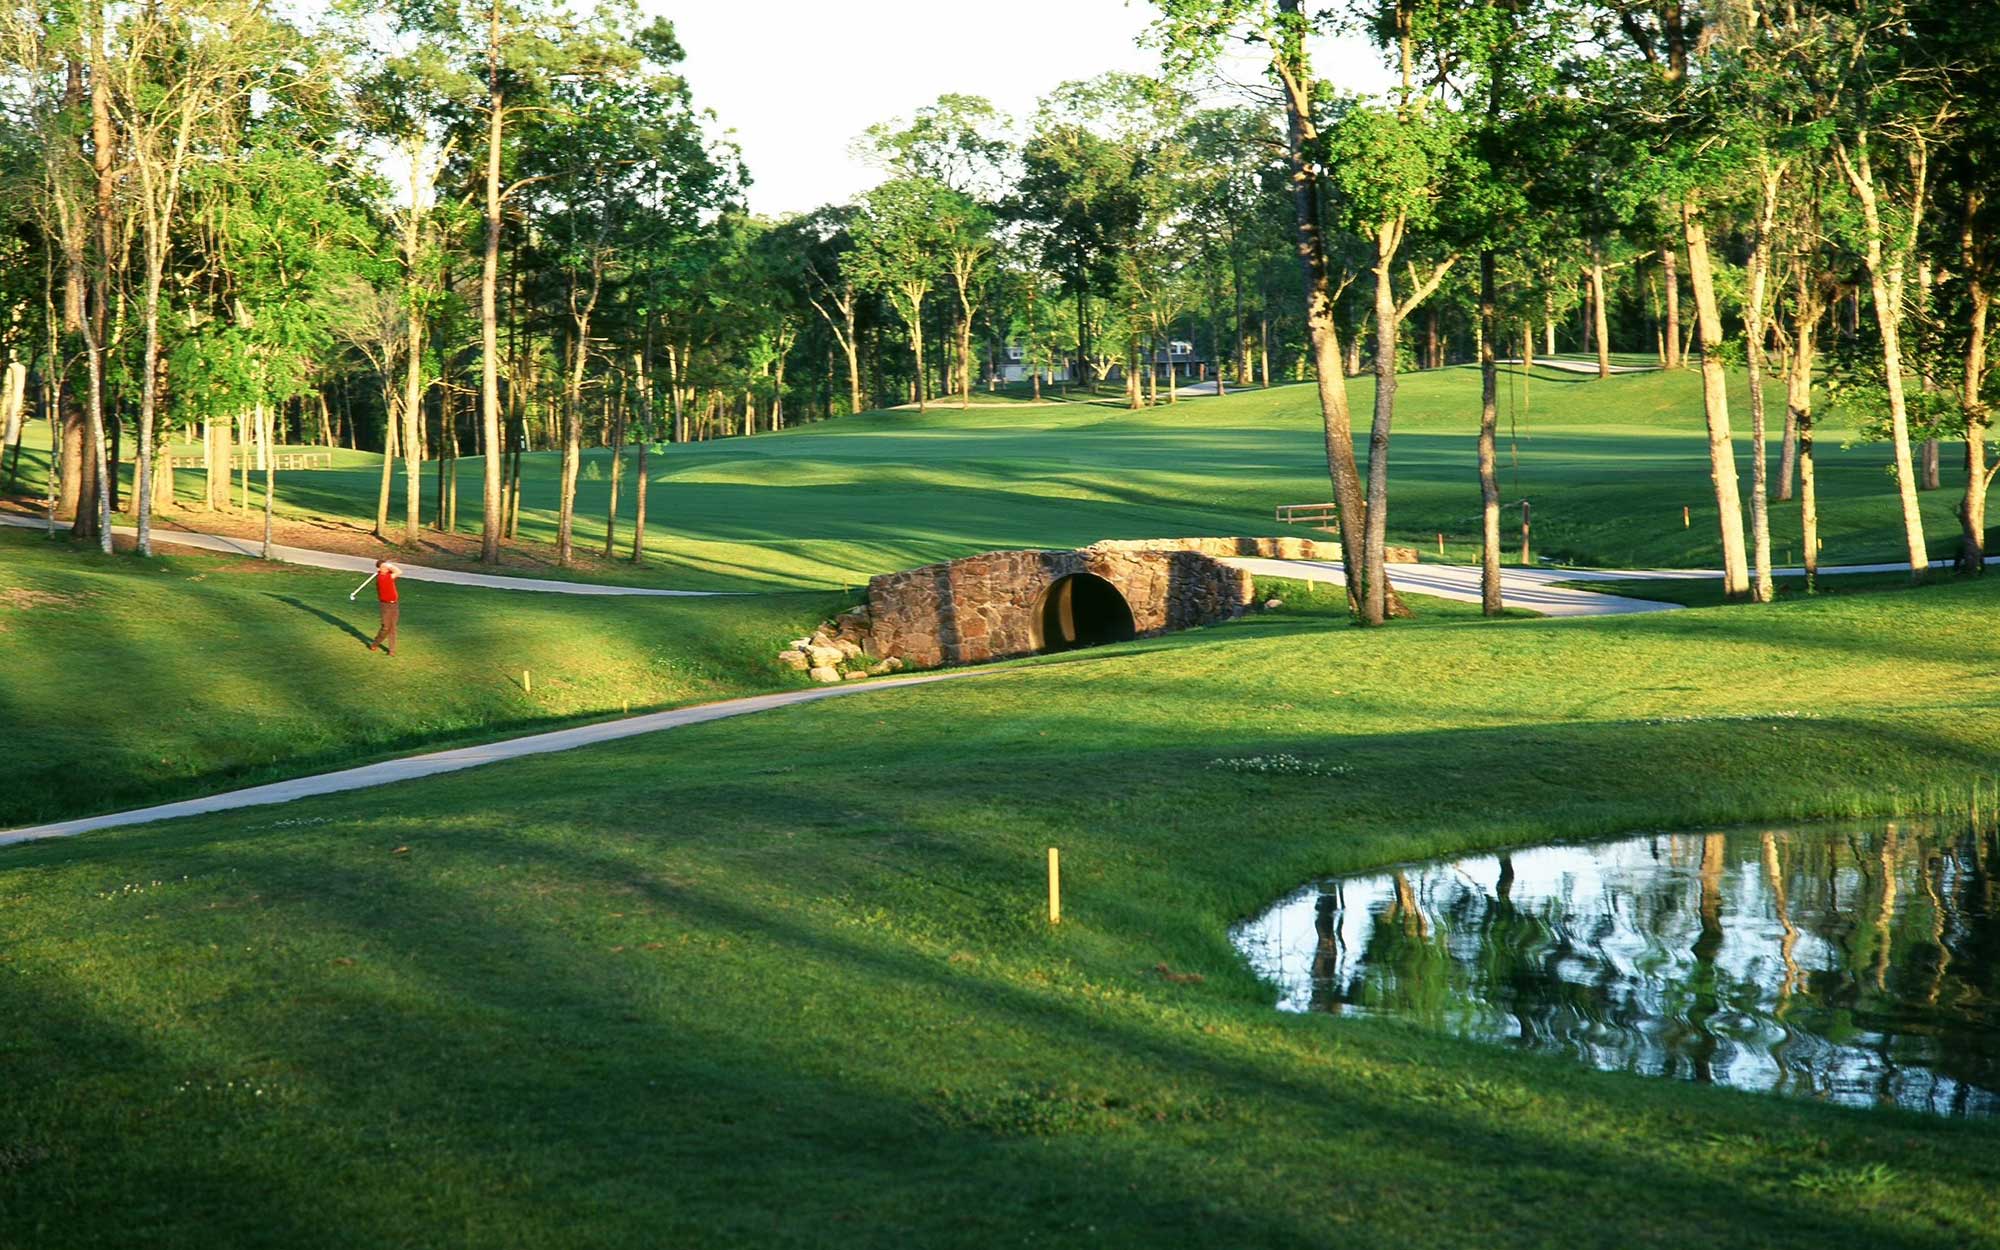 Welcome to the Golf Club of Houston, Texas